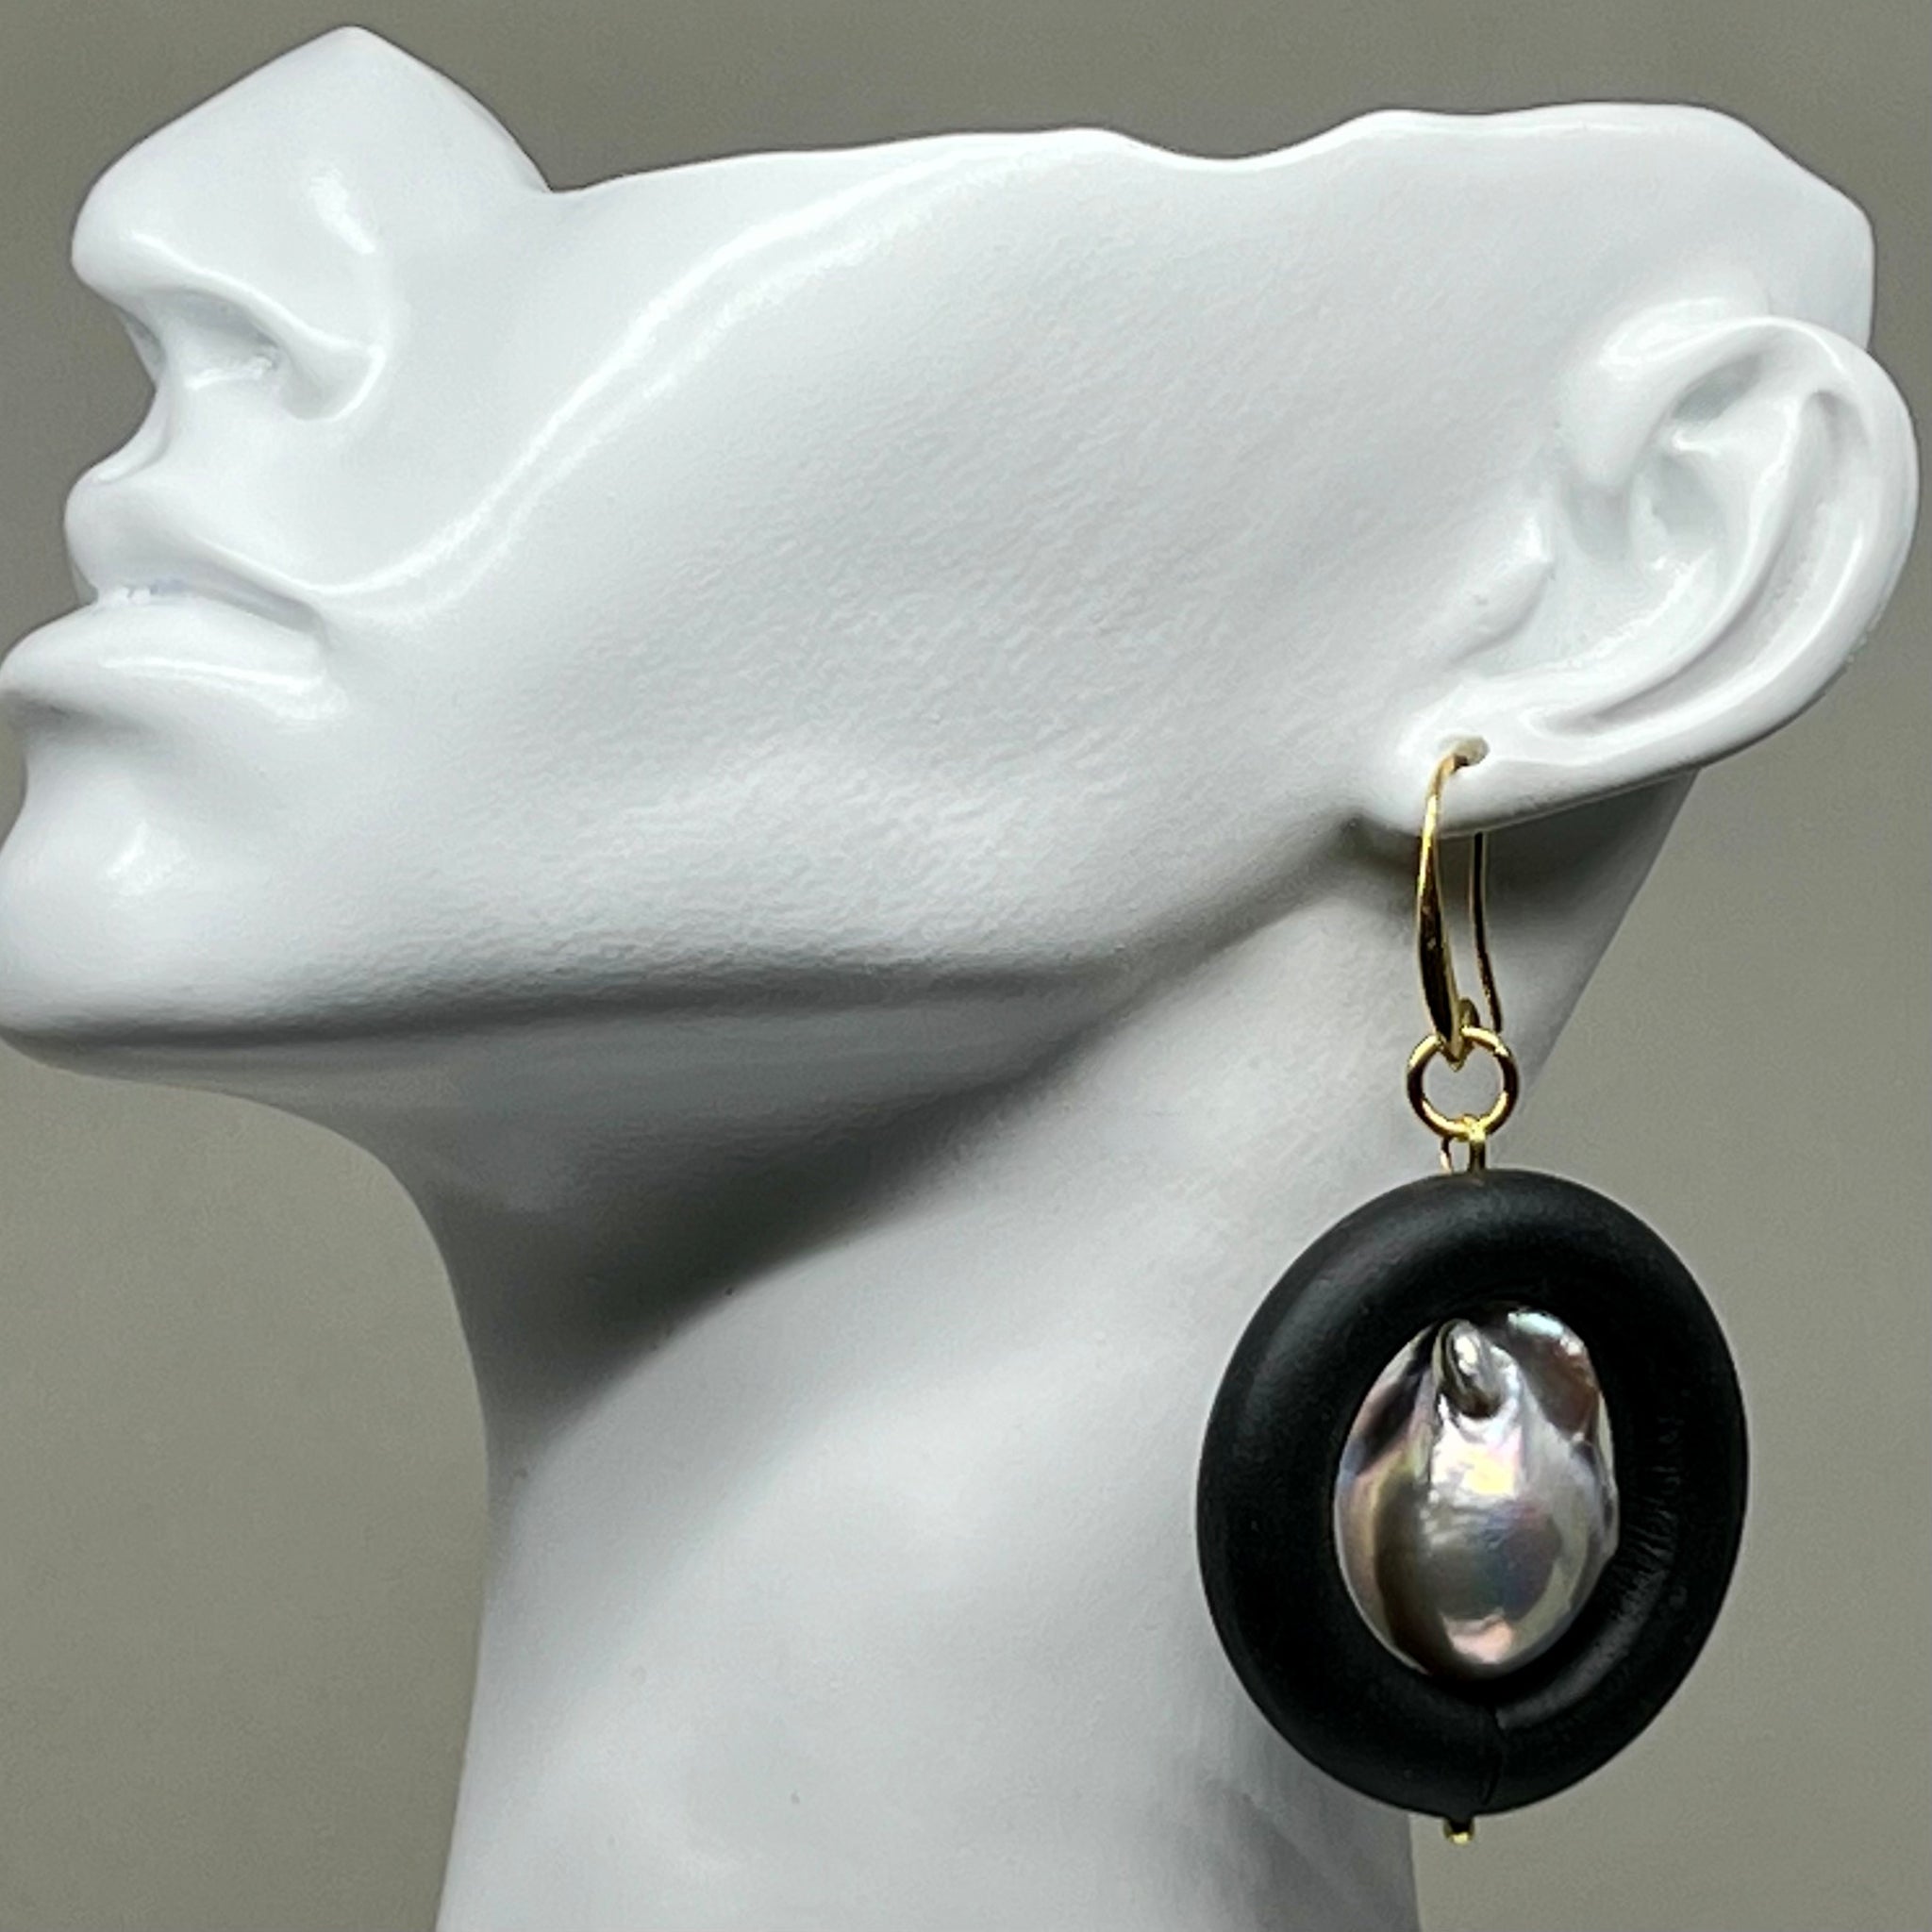 BLACK RUBBER EARRINGS WITH GENUINE BAROQUE PEARLS AND GOLD ENDCAPS. by nyet jewelry